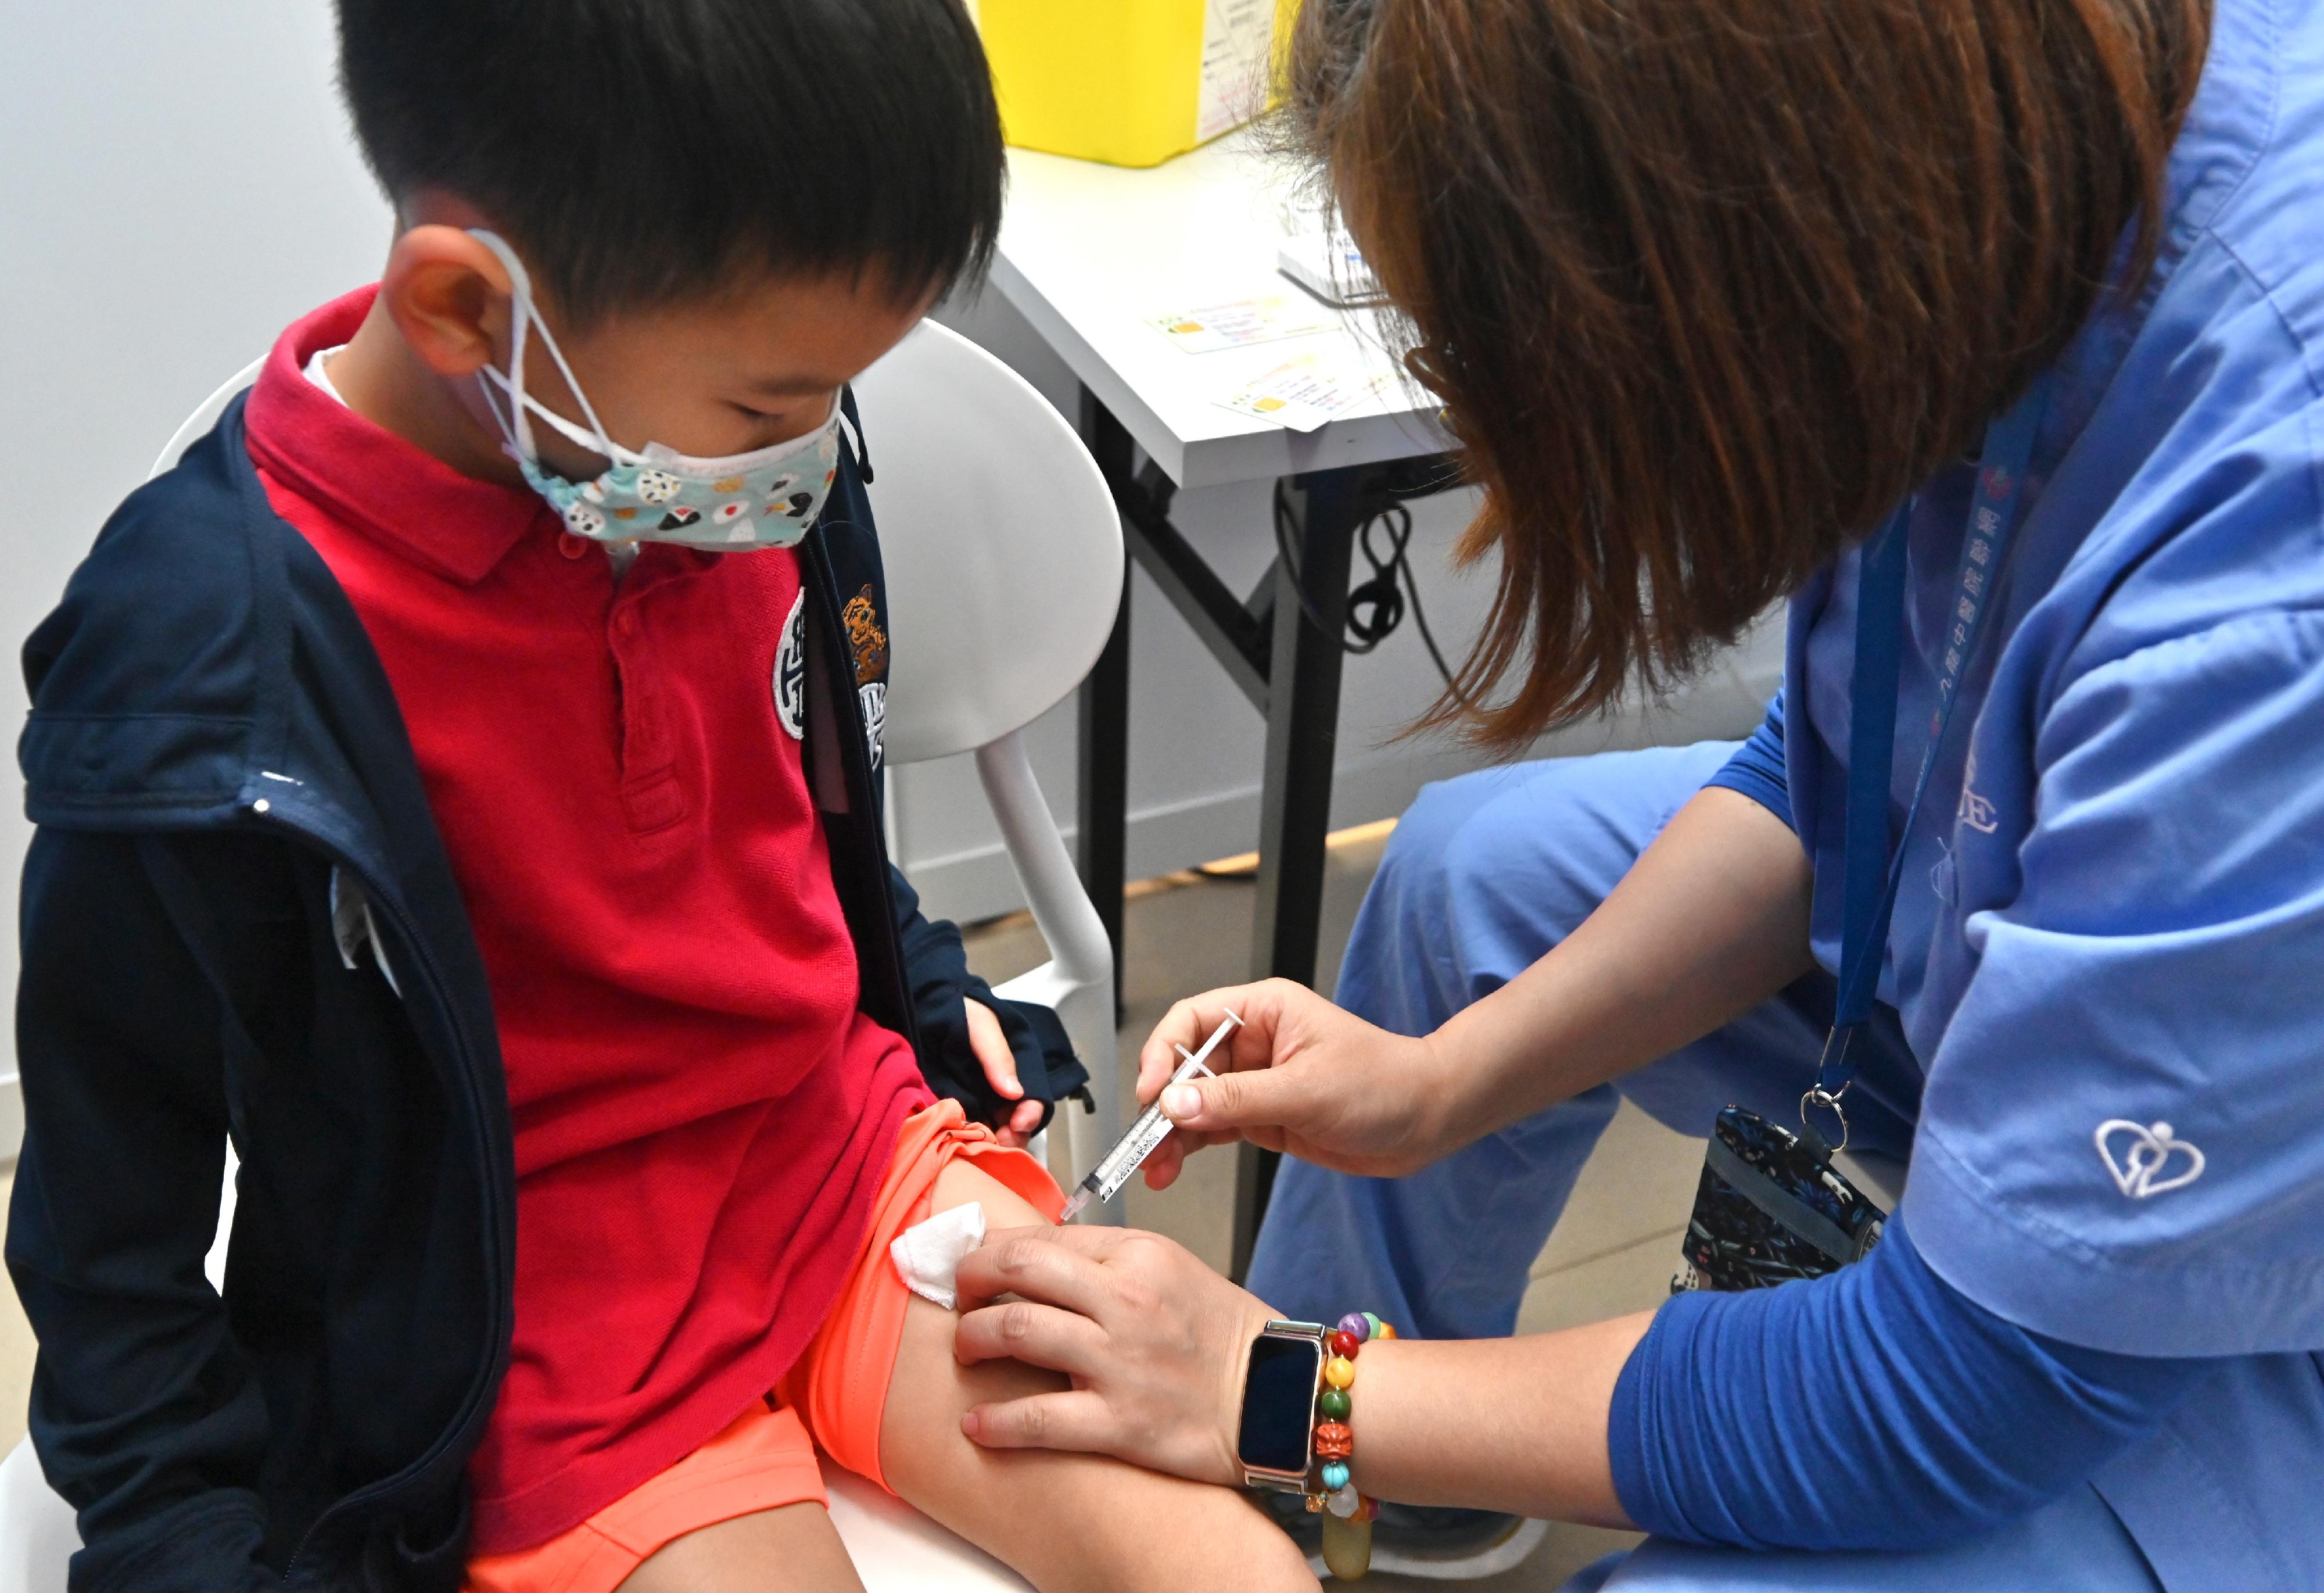 The Children Community Vaccination Centre at Hong Kong Children's Hospital in Kowloon Bay came into operation today (February 16) to provide the BioNTech vaccination service to children aged 5 to 11. Photo shows a child receiving the BioNTech vaccine at anterolateral aspect of mid-thigh.